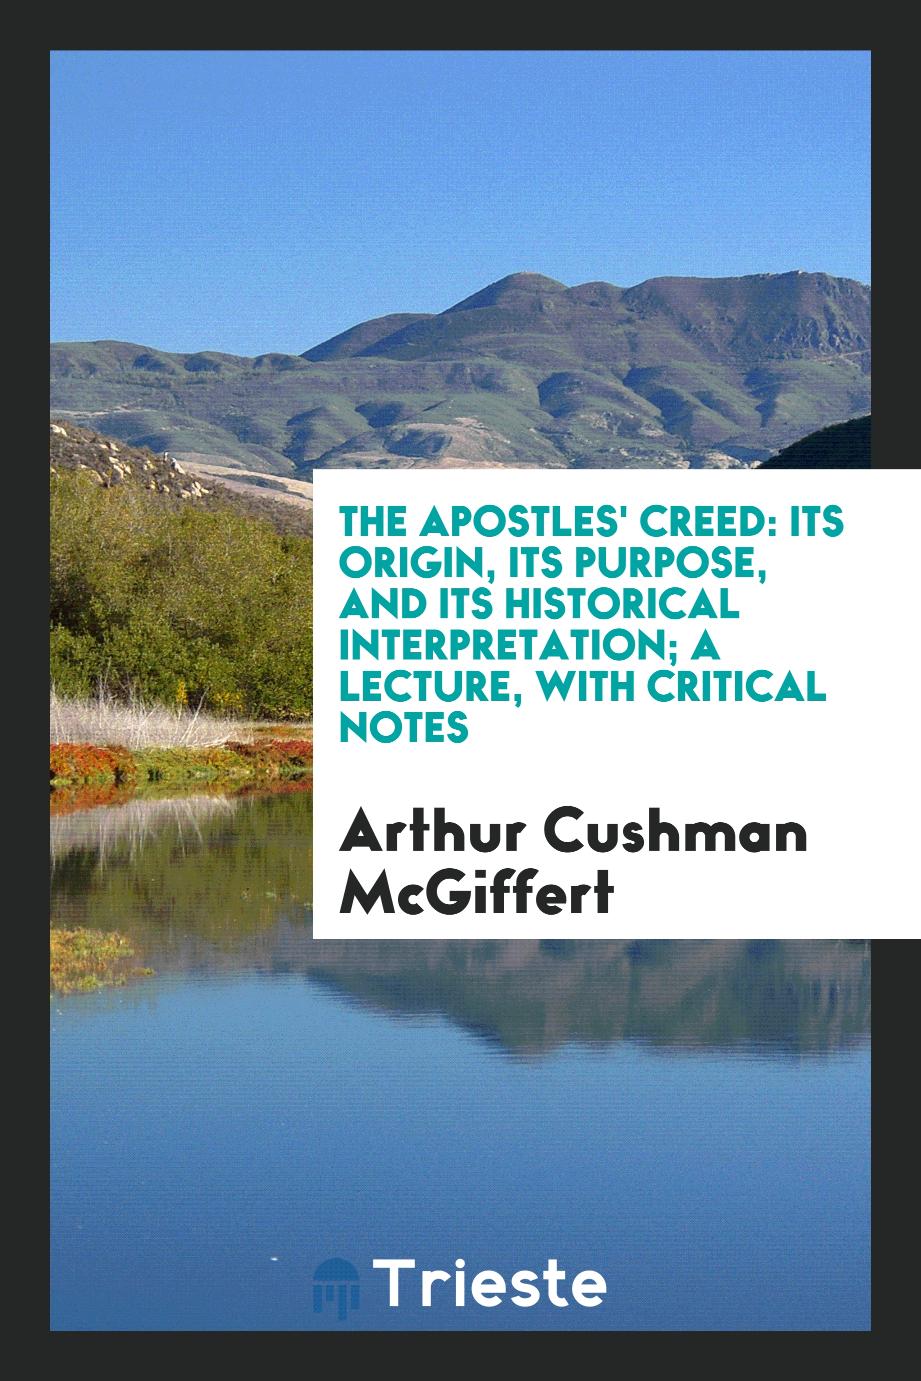 The Apostles' creed: its origin, its purpose, and its historical interpretation; a lecture, with critical notes